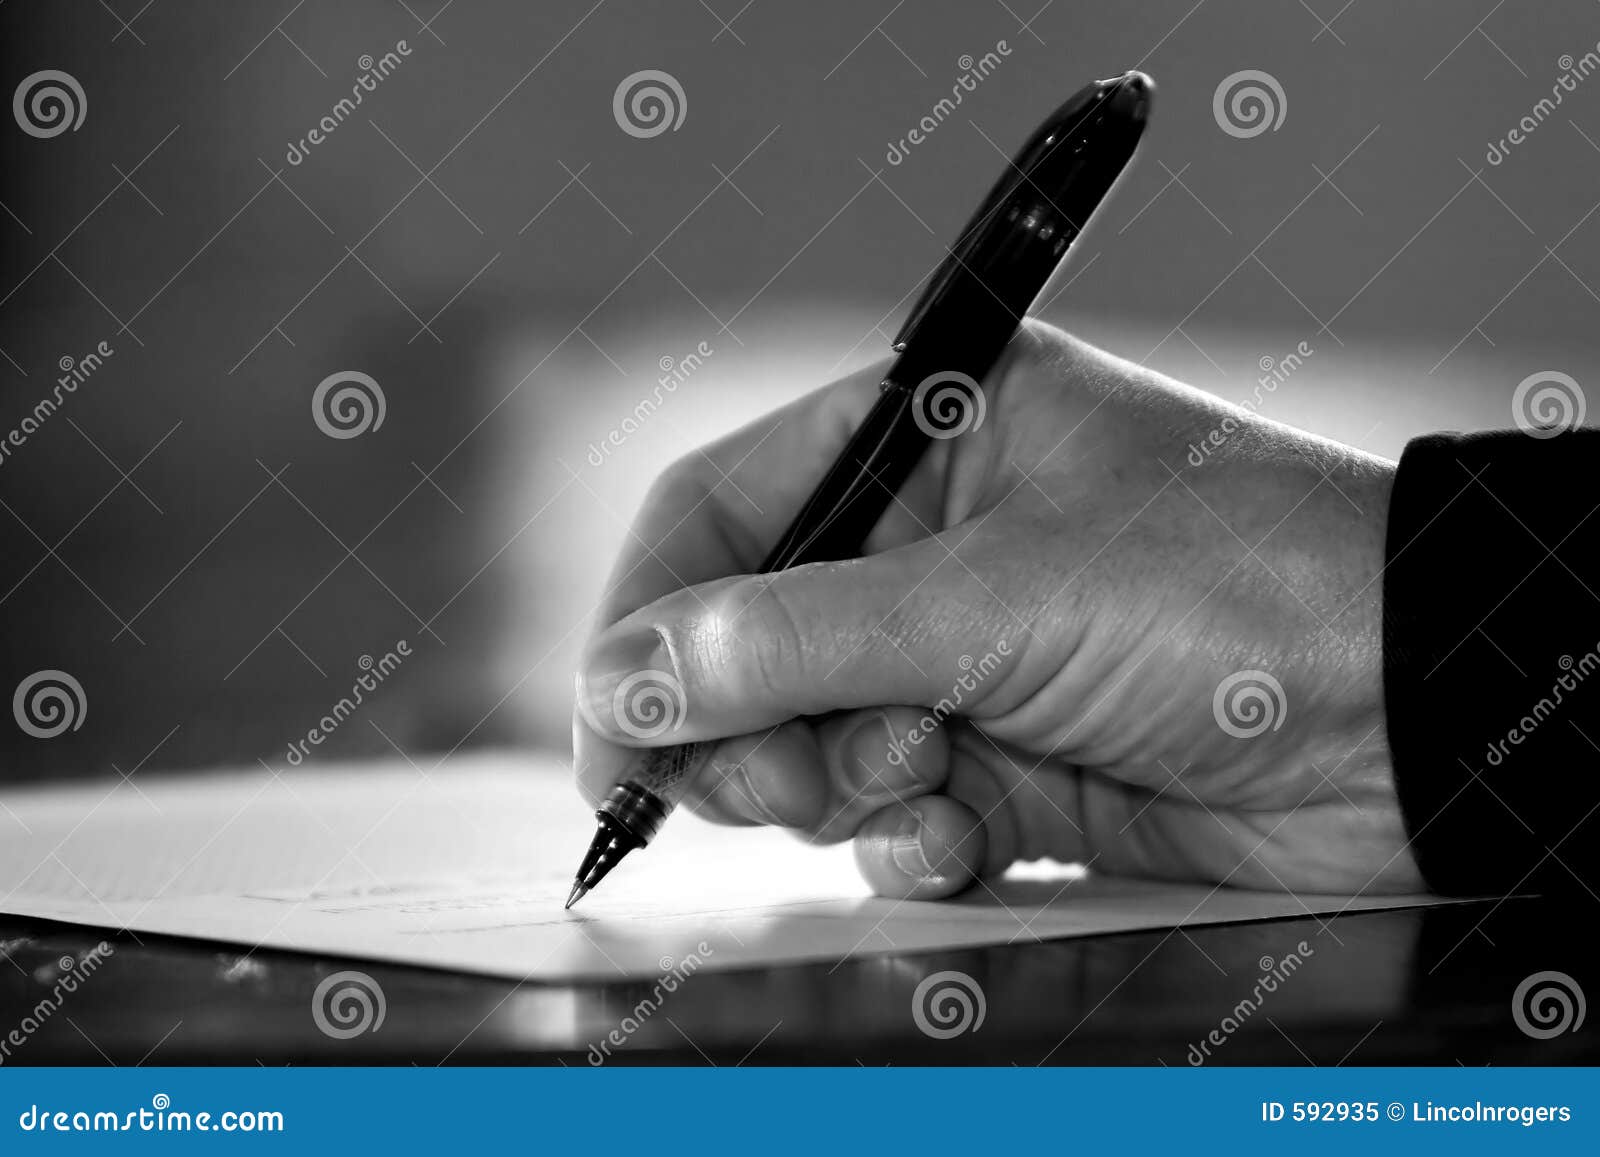 hand signing paperwork/contract (black & white)